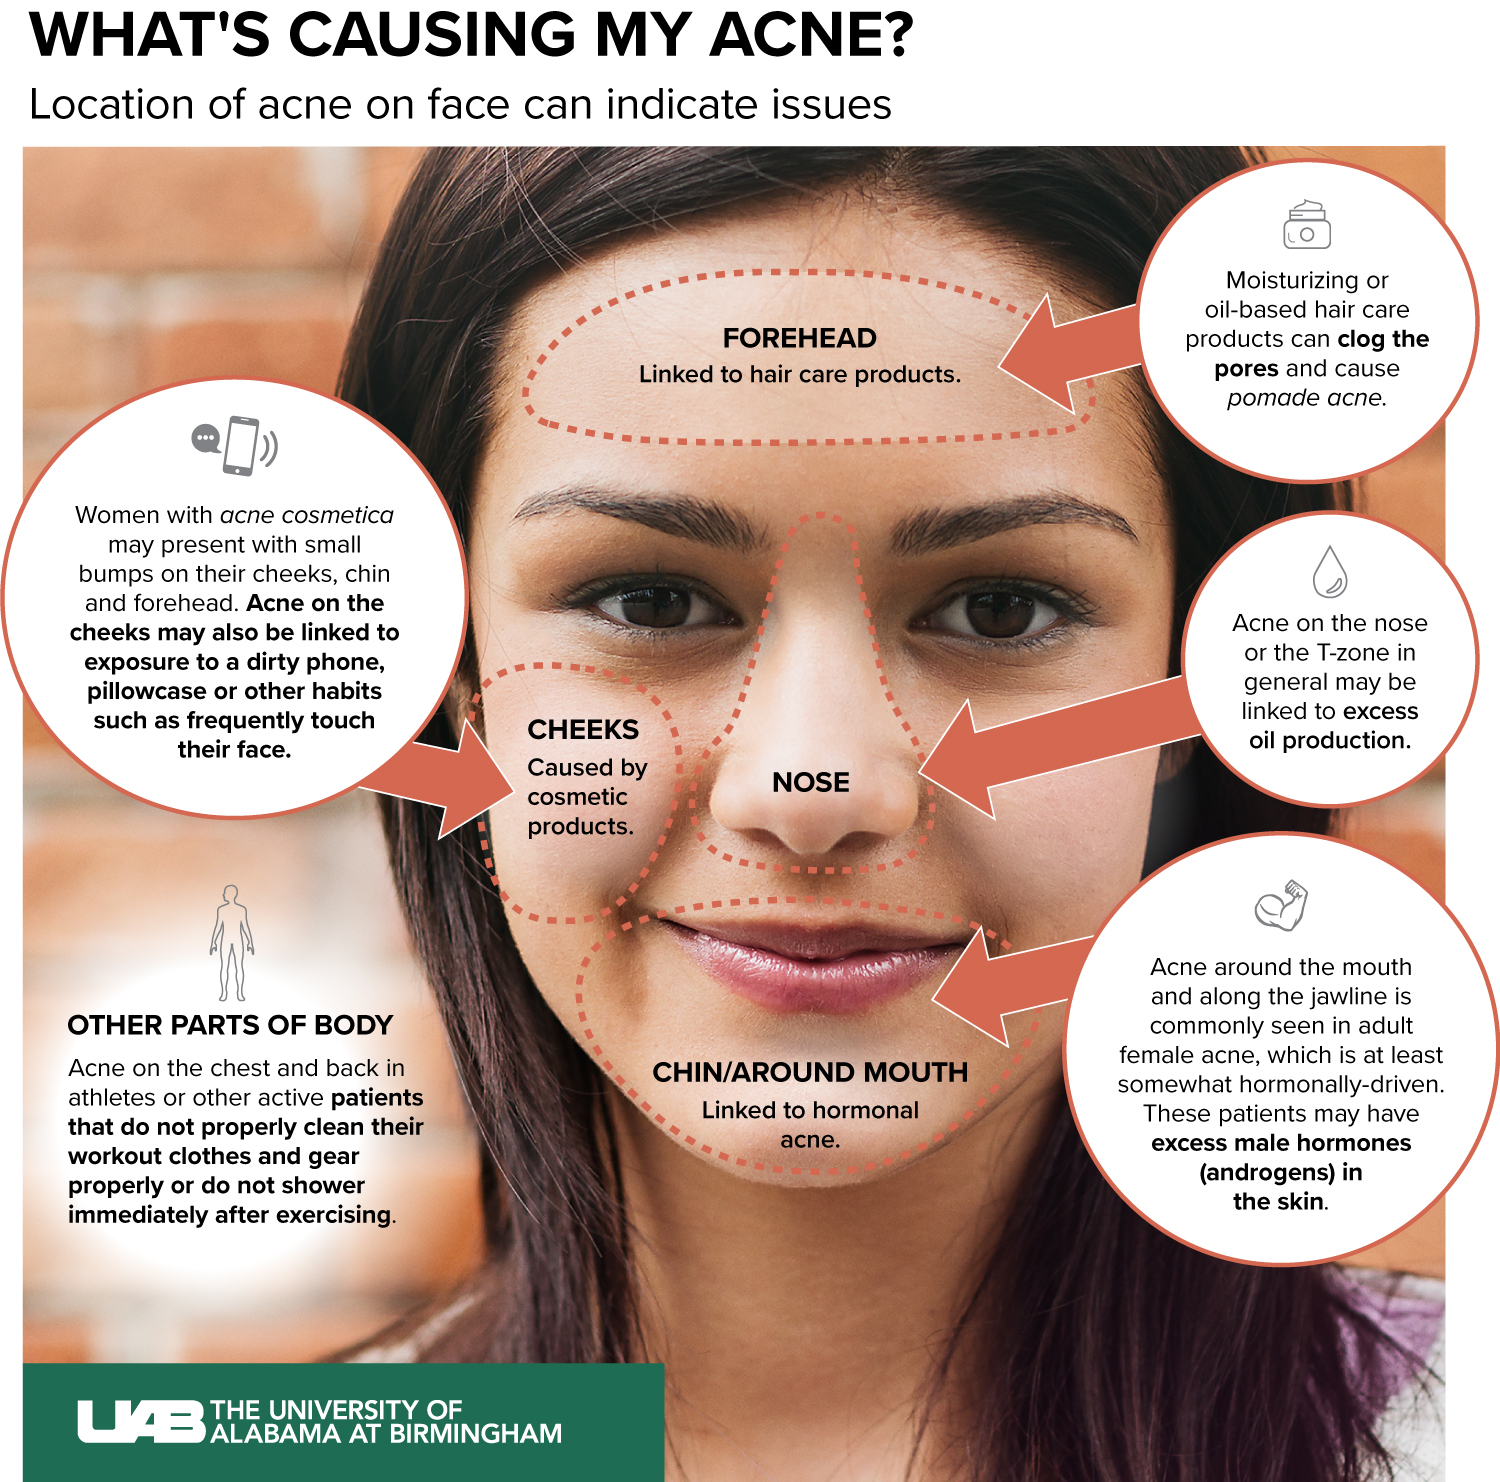 Does Touching Your Face Cause Acne?